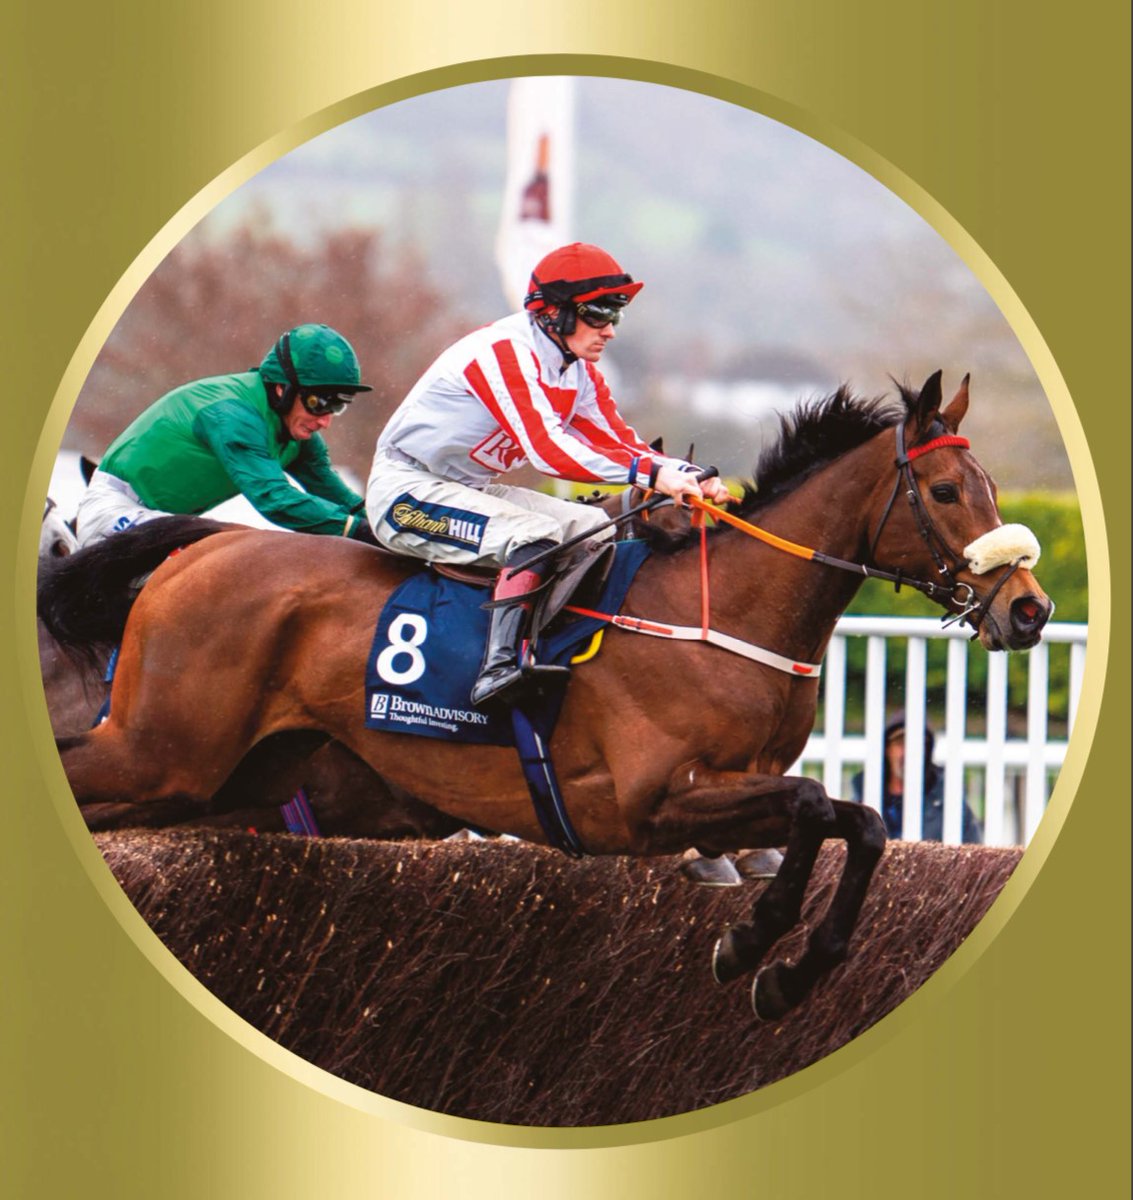 The April Meeting takes place at Cheltenham Racecourse on the 17th and 18th April. Keep an eye out for the #NAFRacing Performance of the Day after the final race each day to get voting for your favourite.